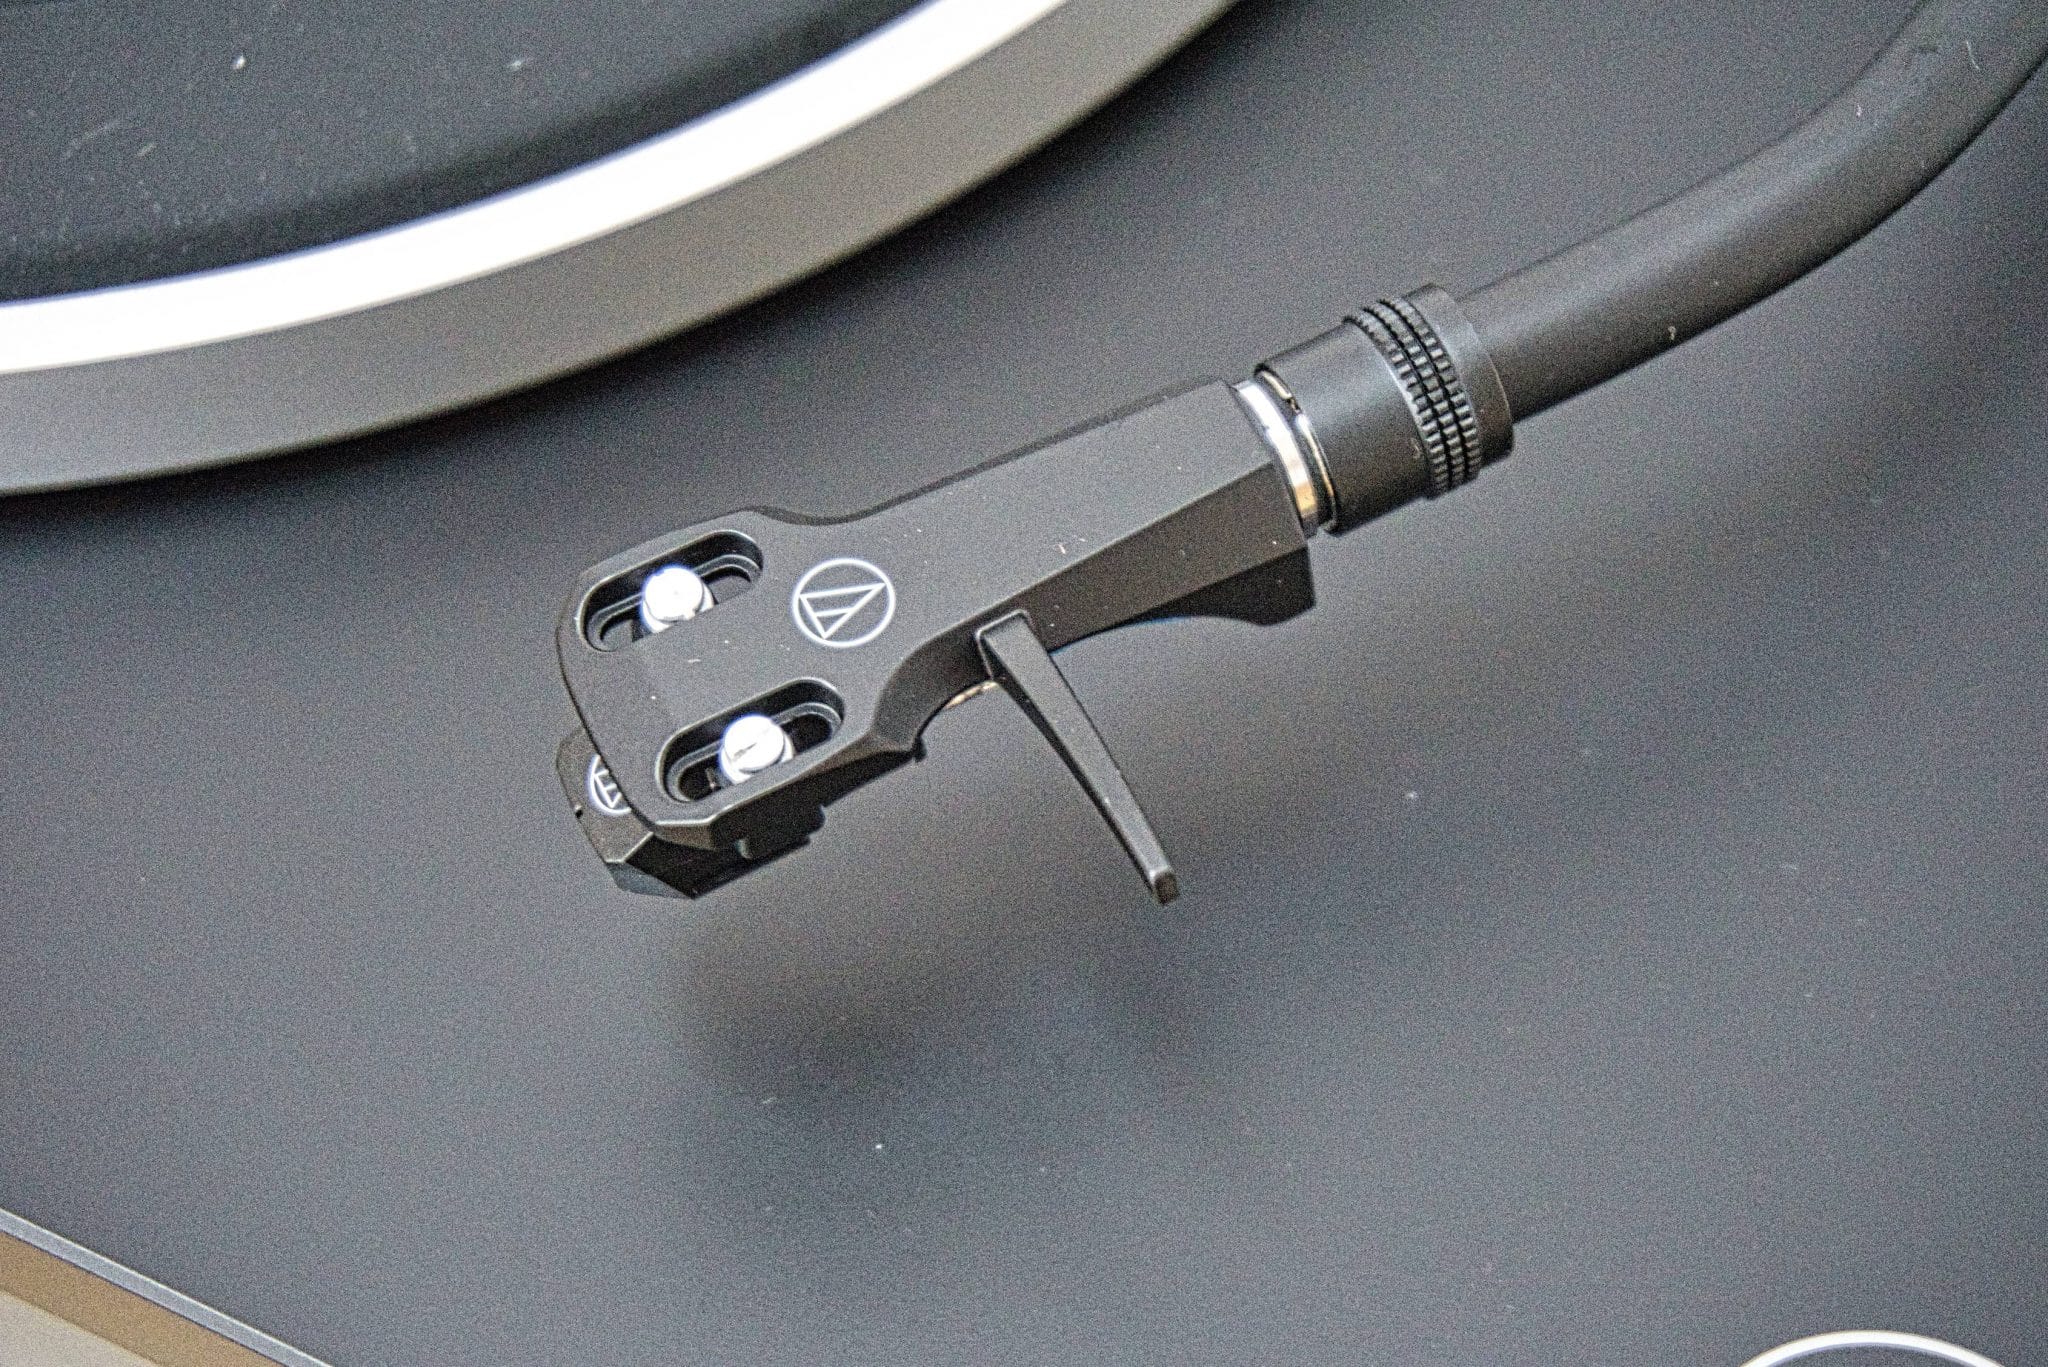 LP5x Turntable From Audio-Technica